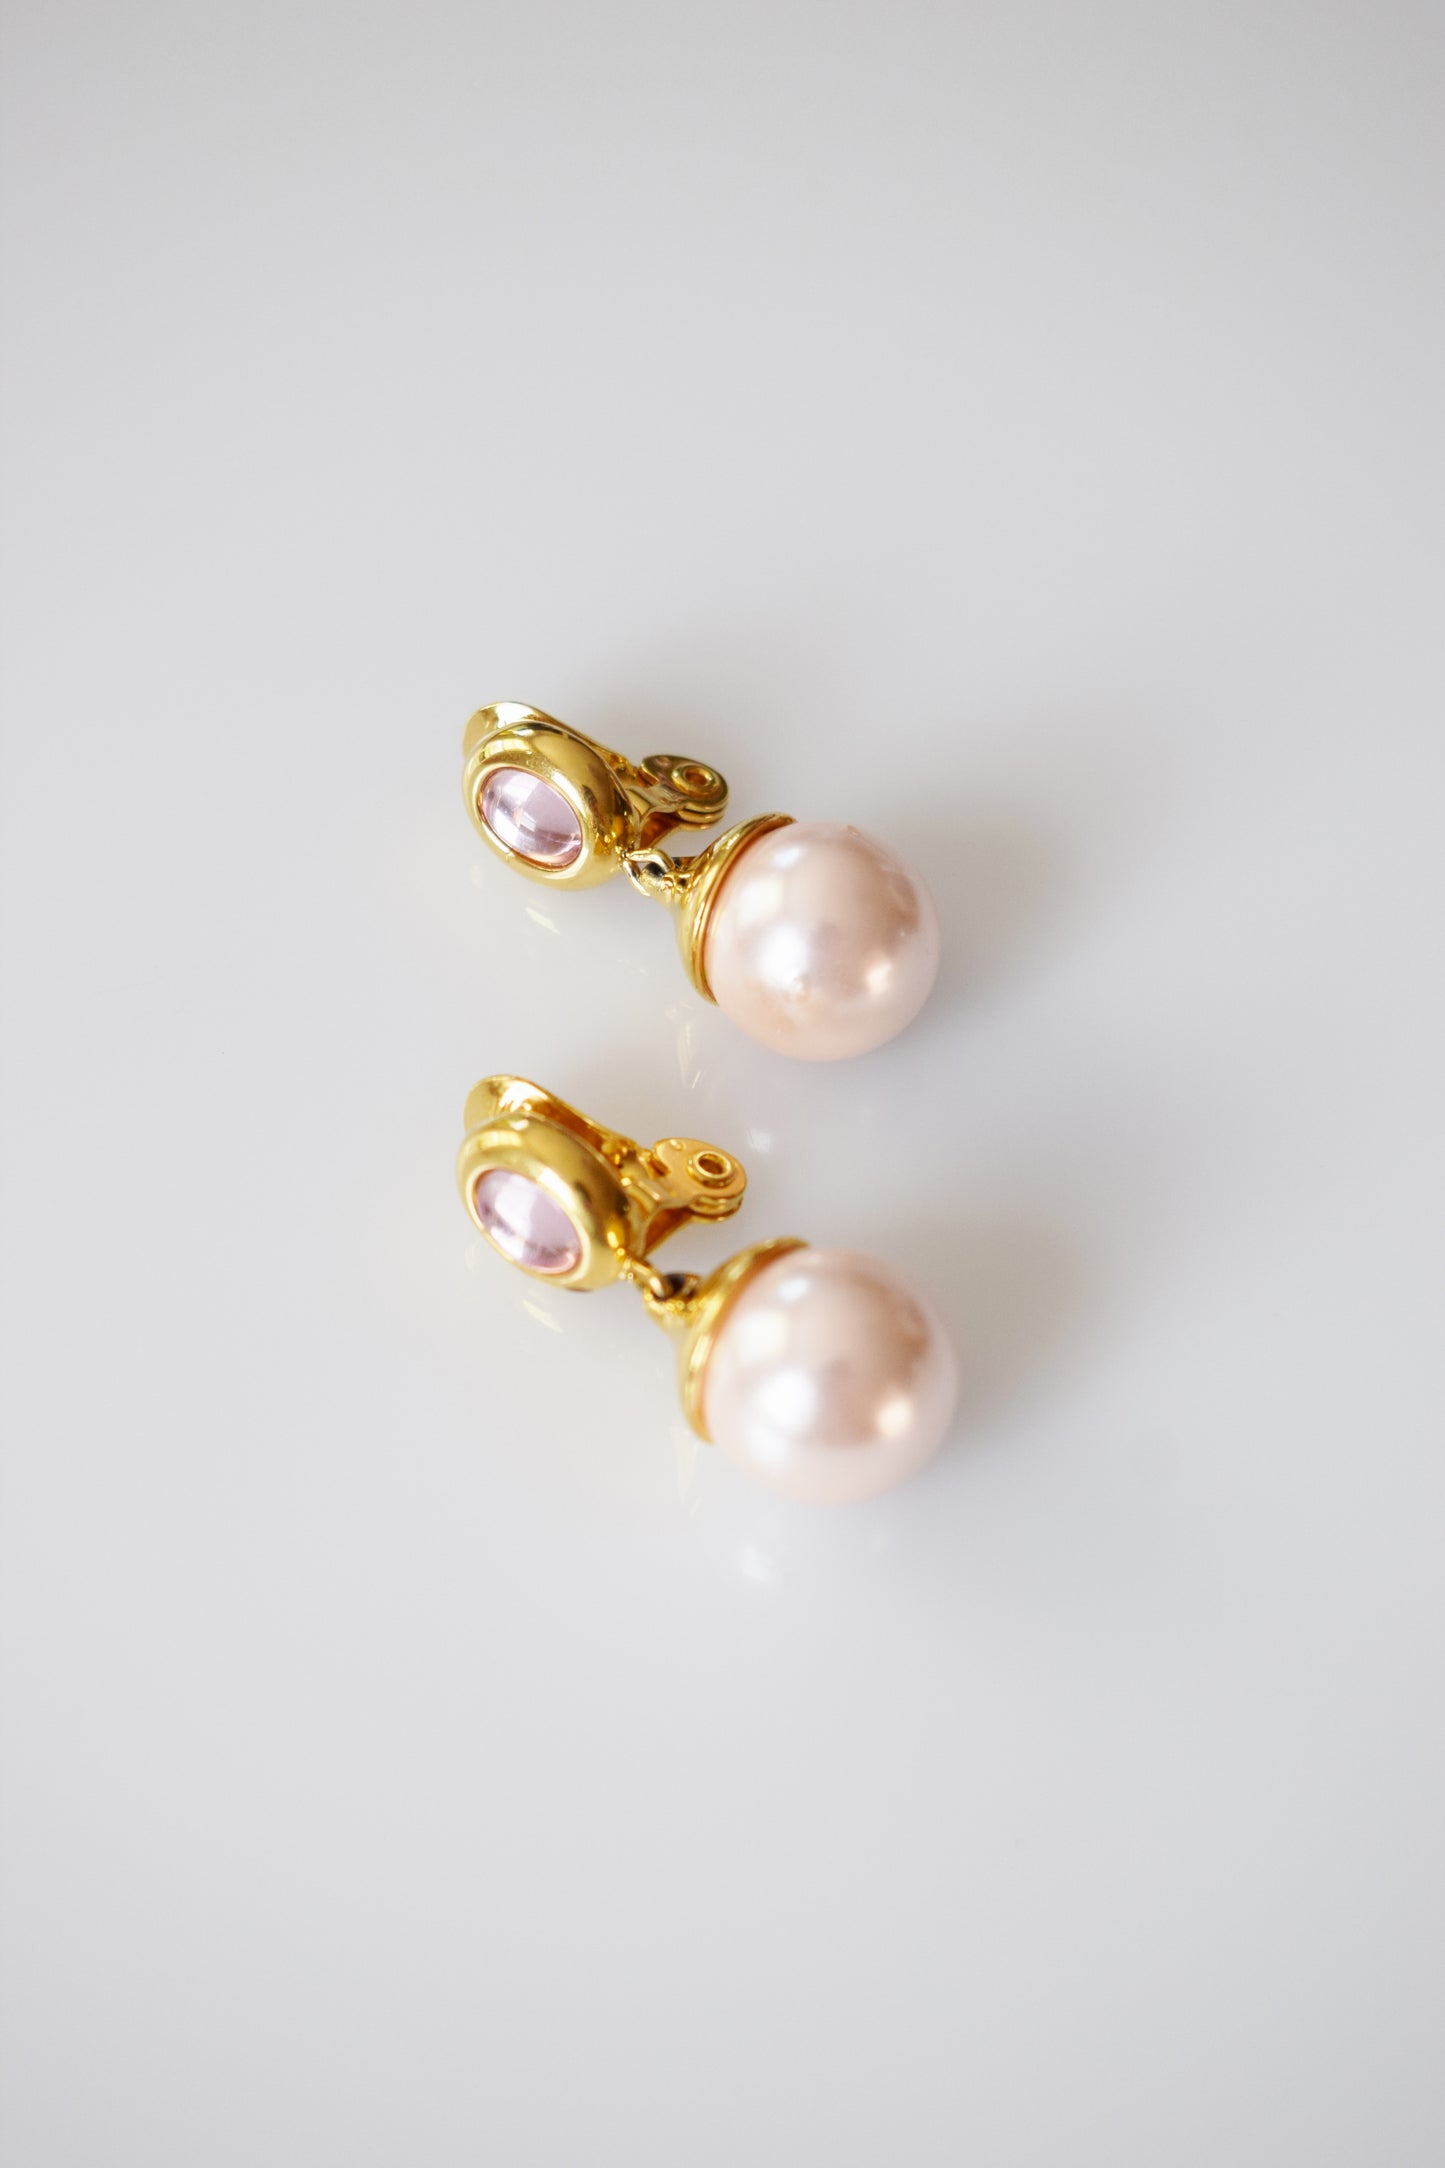 90s Pearl Drop and Gripoix Fashion Earrings by Monet